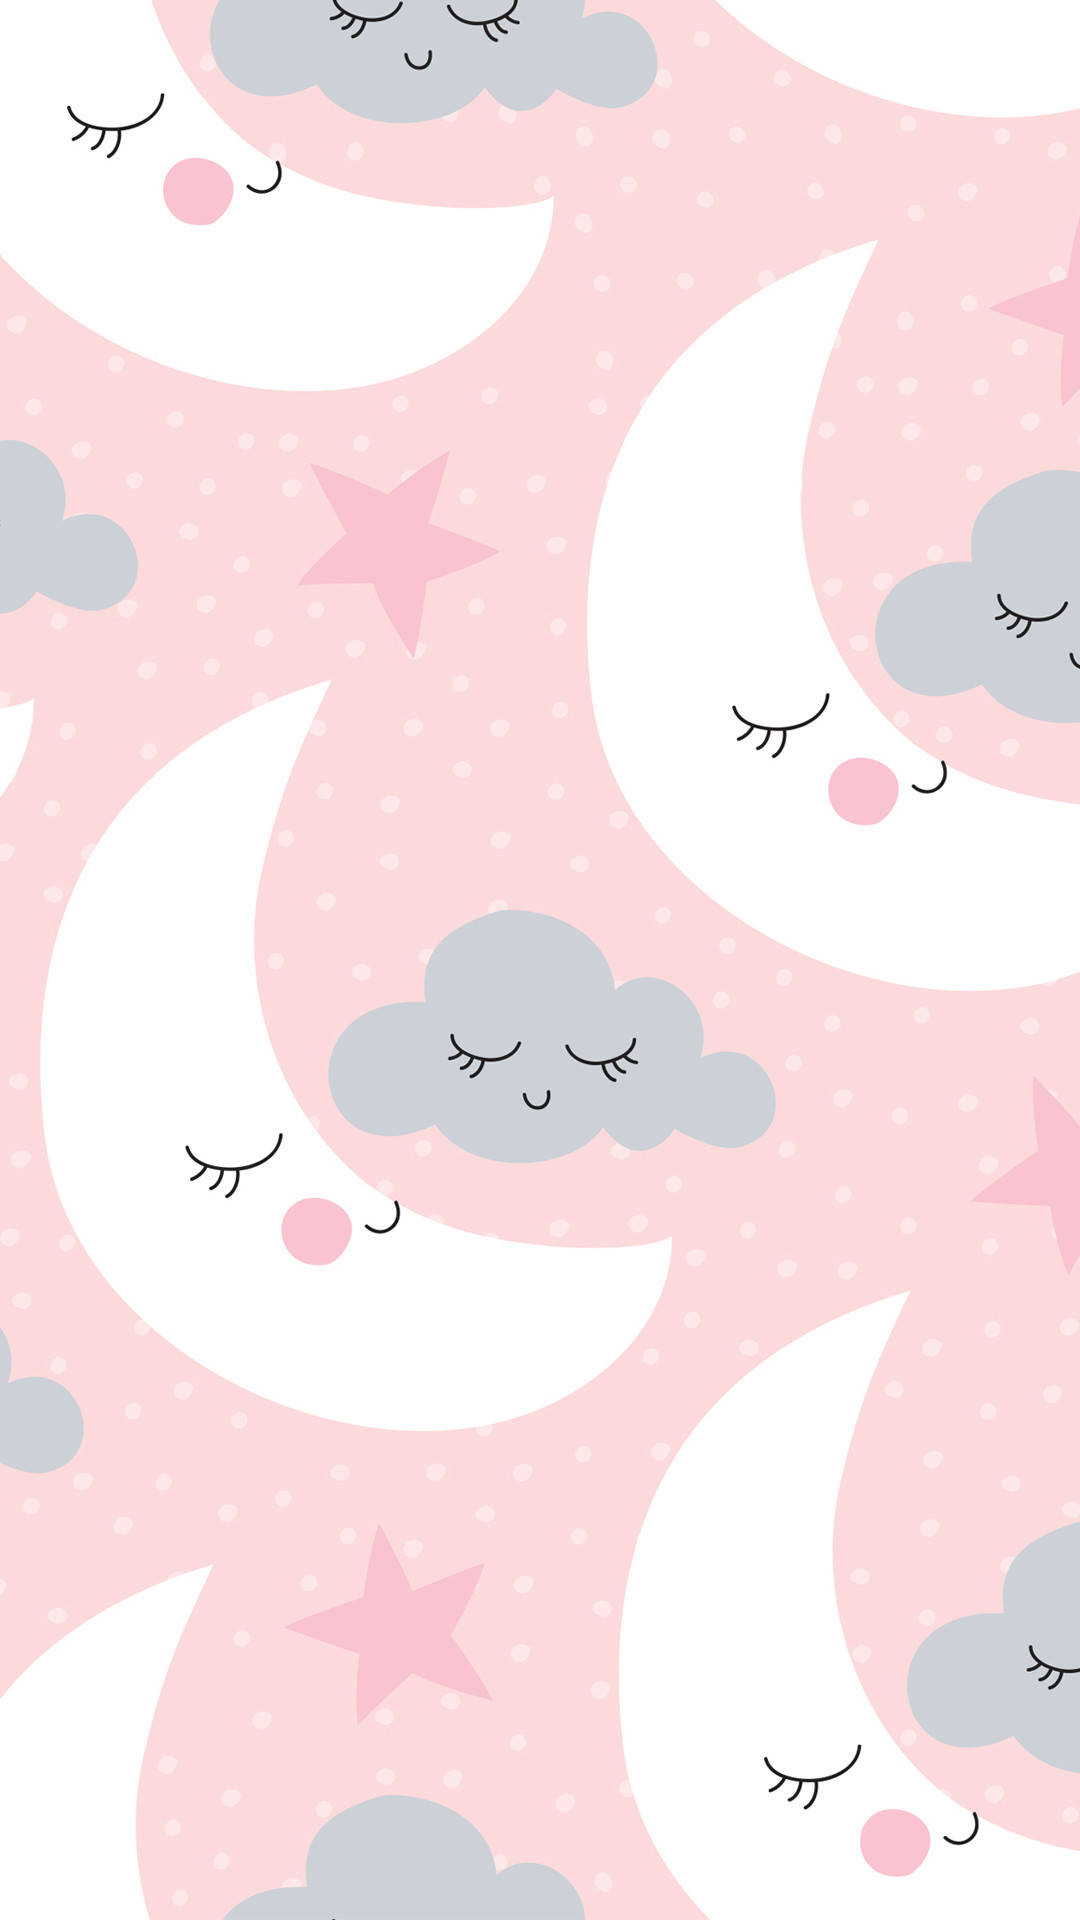 Moon And Cloud Girly Iphone Wallpaper